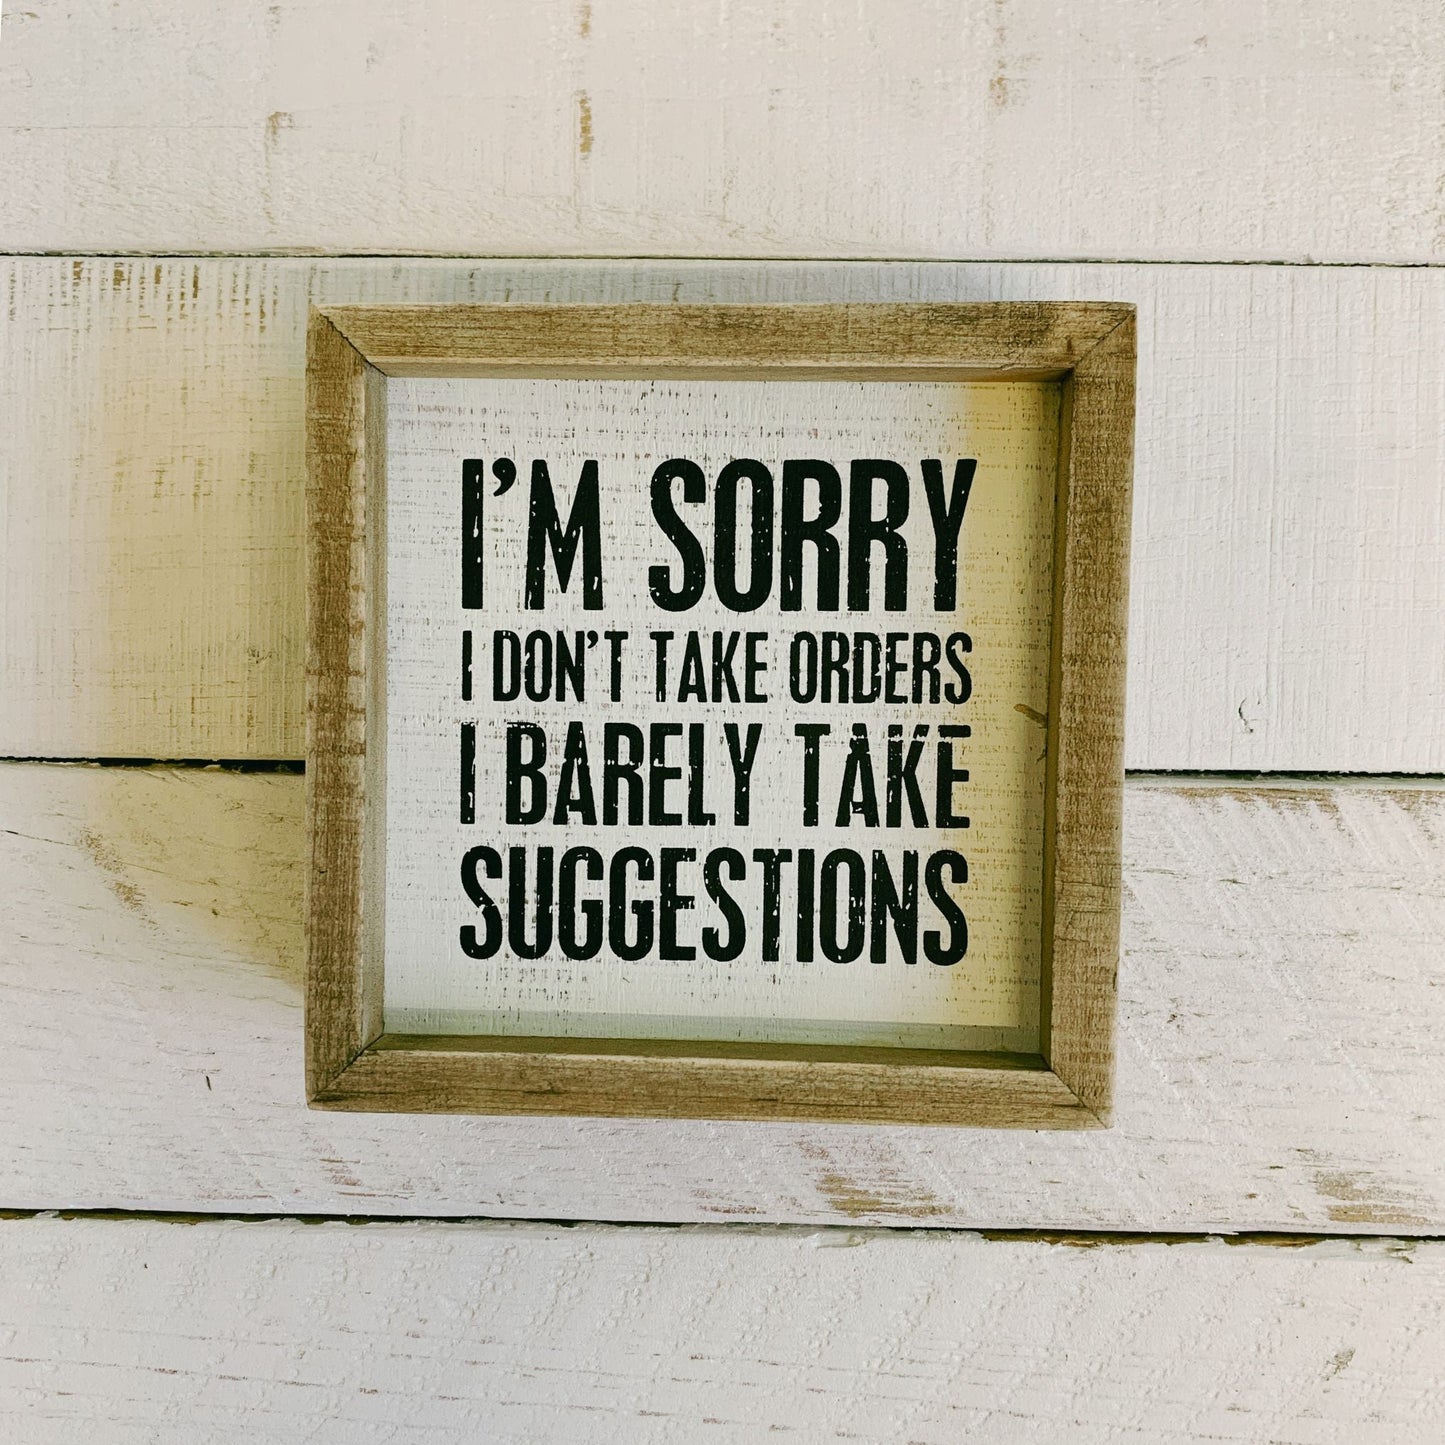 I'm Sorry I Don't Take Orders Inset Wooden Box Sign | Tan and Off-White